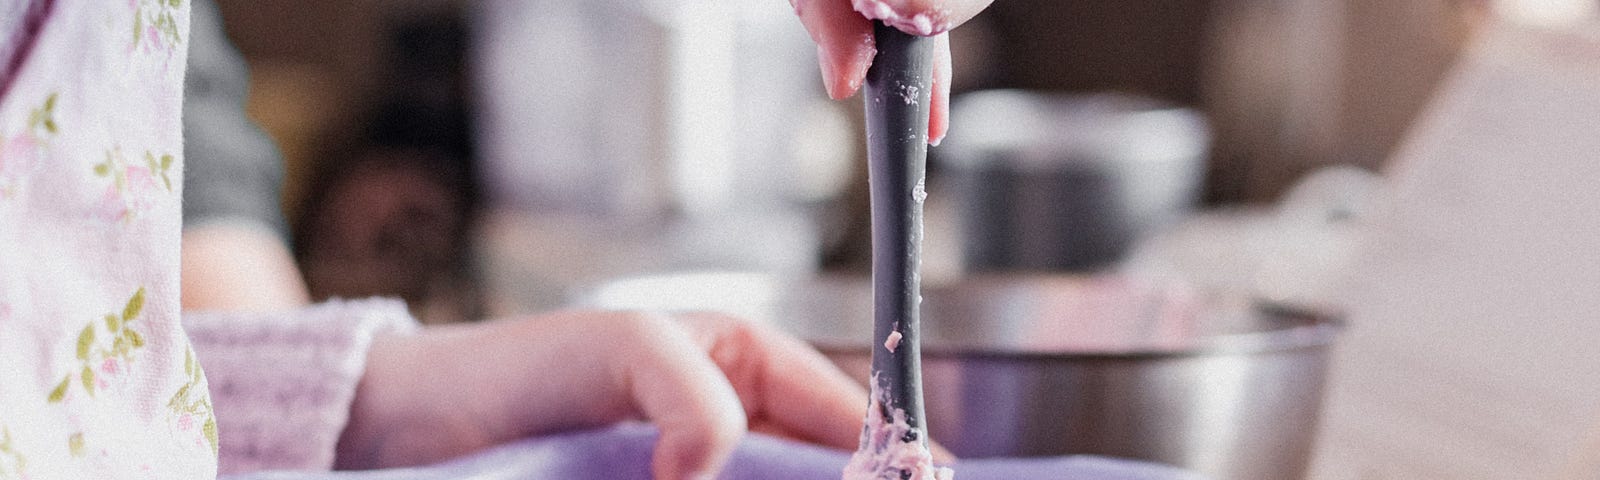 A woman standing over a purple mixing bowl with a spoon mixing pink icing.